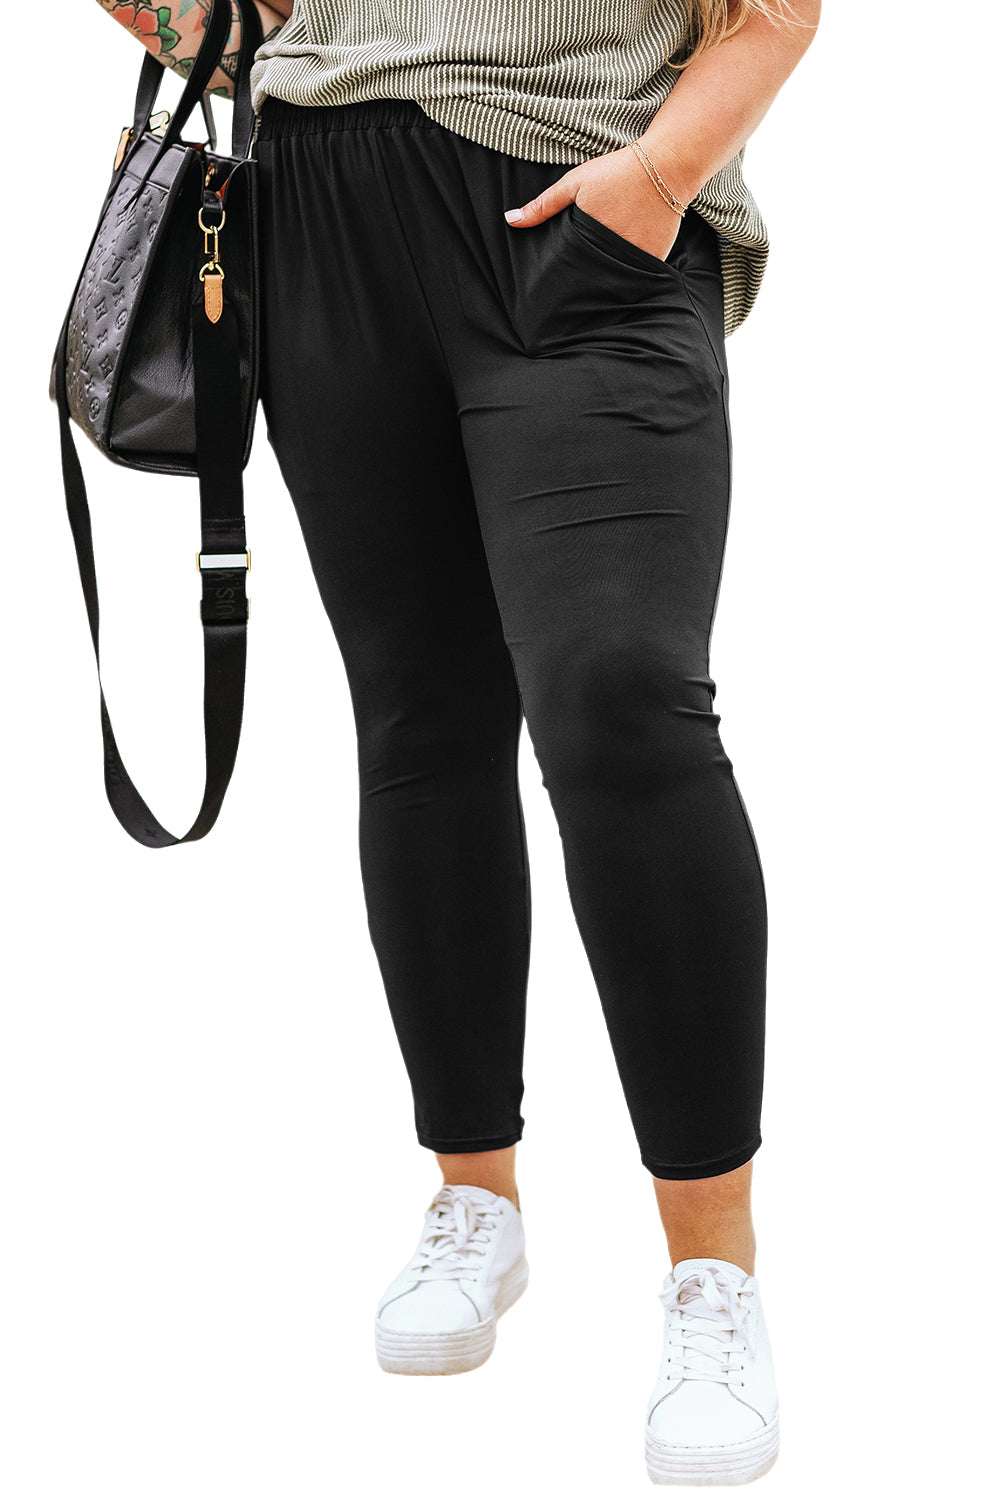 Black Plus Size Frill High Waist Pocketed Soft Pants